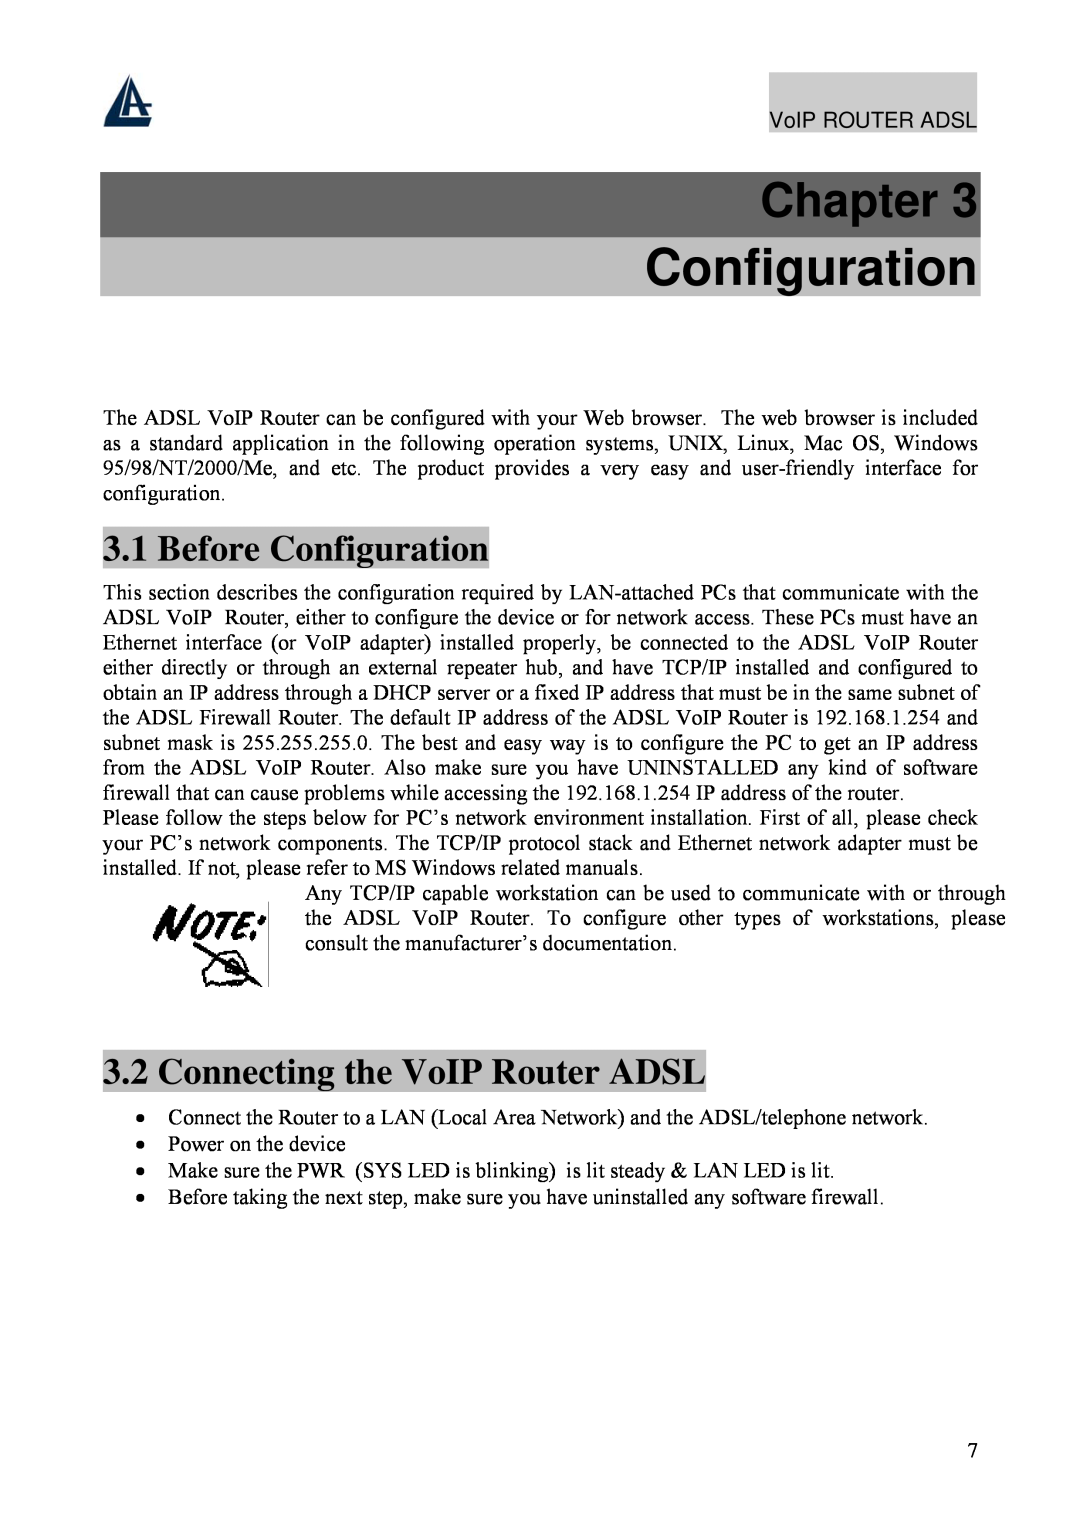 Atlantis Land A02-RAV211 manual Before Configuration, Connecting the VoIP Router ADSL, Chapter 